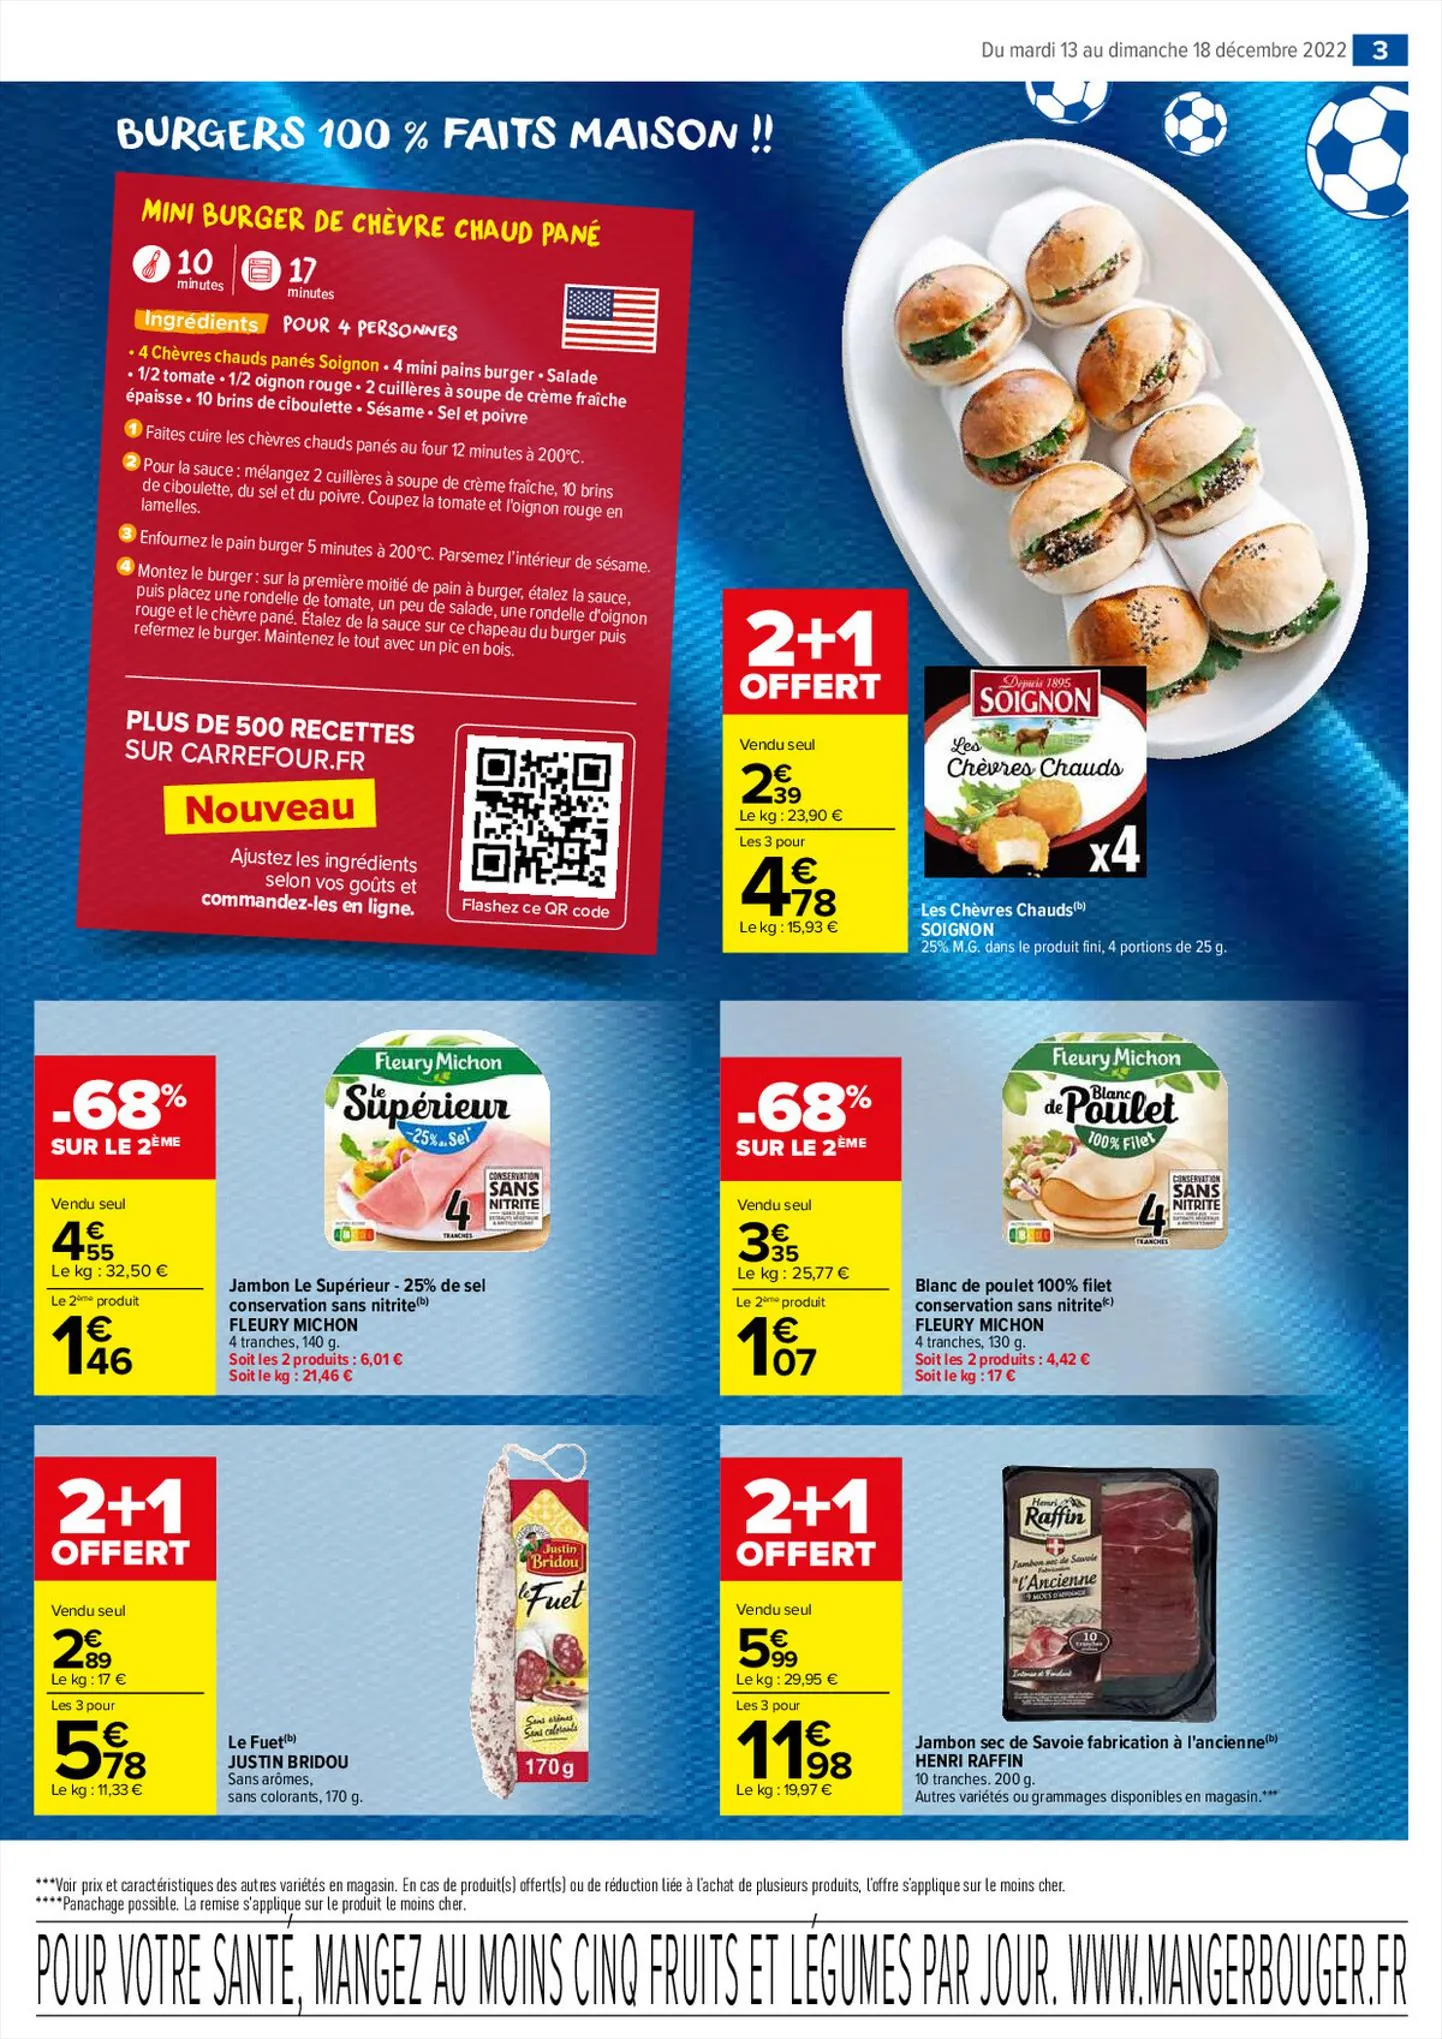 Catalogue Carrefour Supporter des Supporters, page 00003